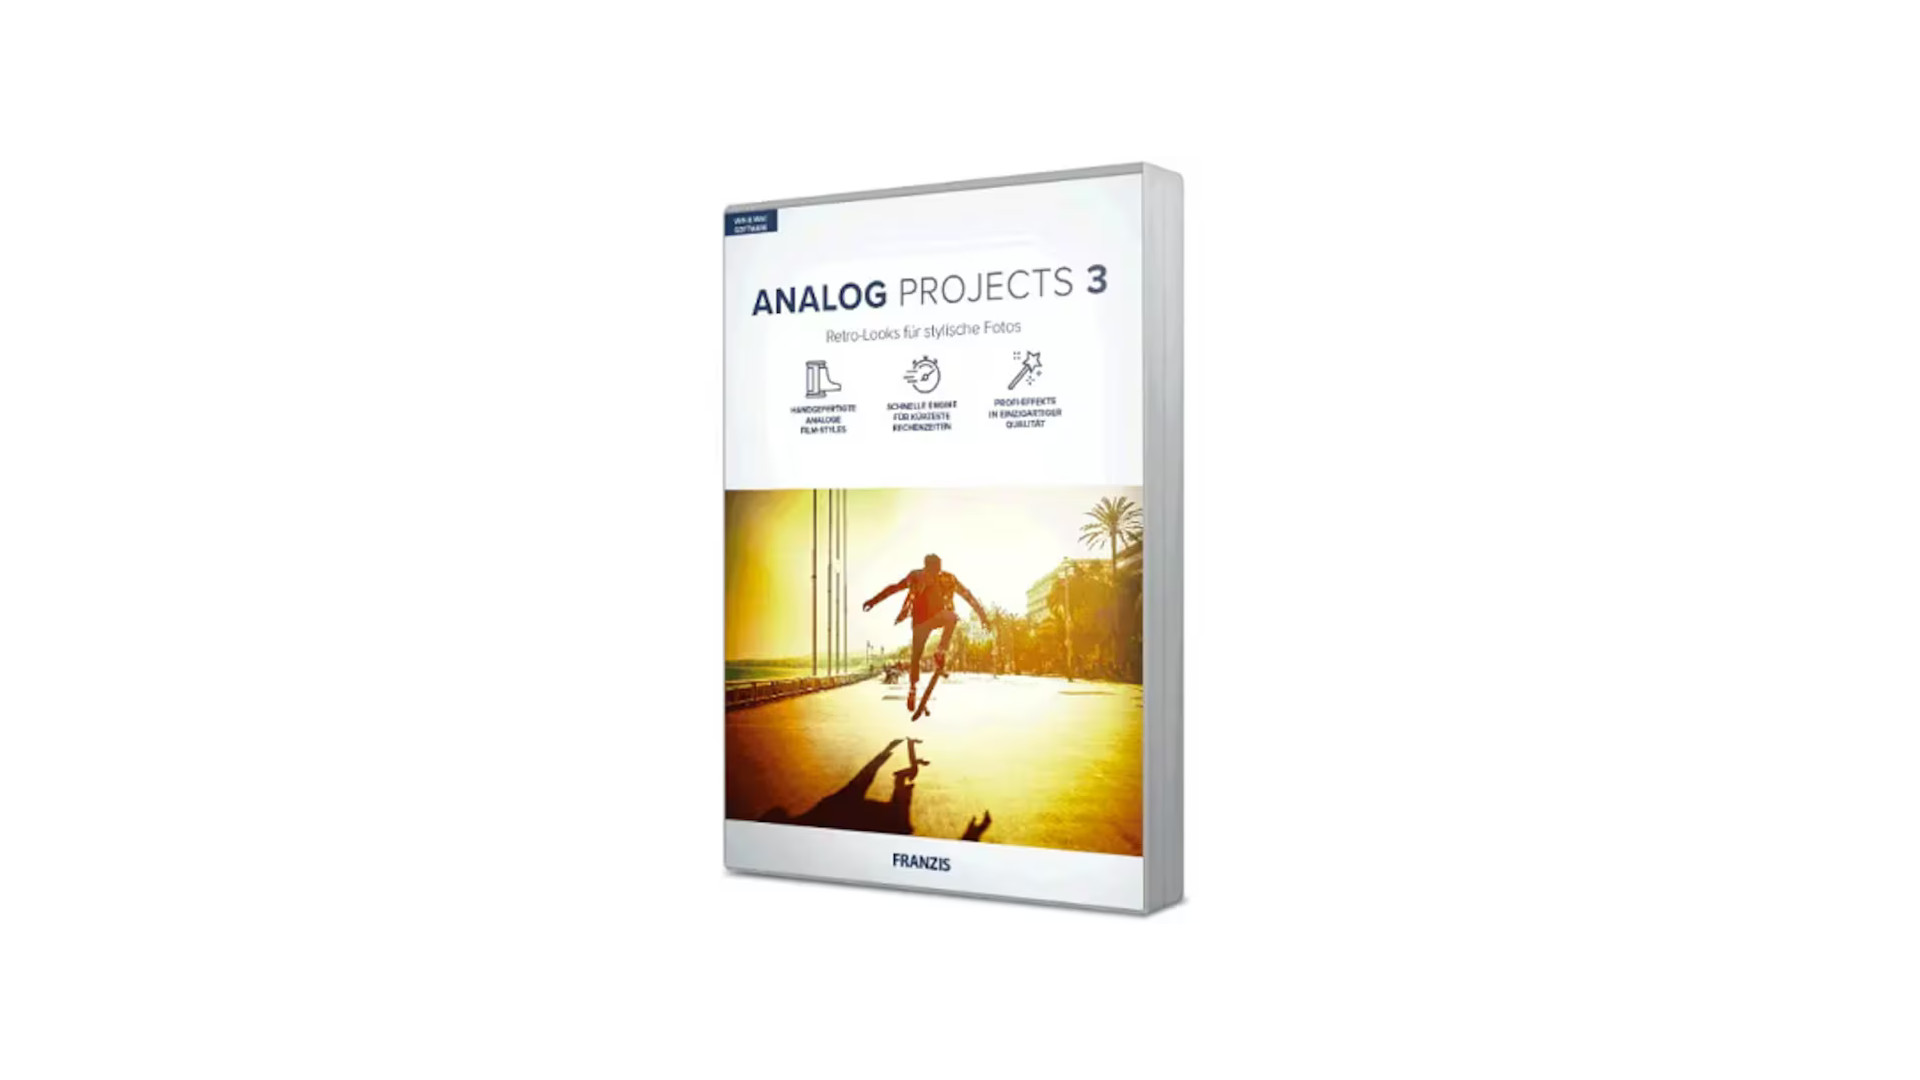 ANALOG projects 3 - Project Software Key (Lifetime / 1 PC) [USD 33.89]